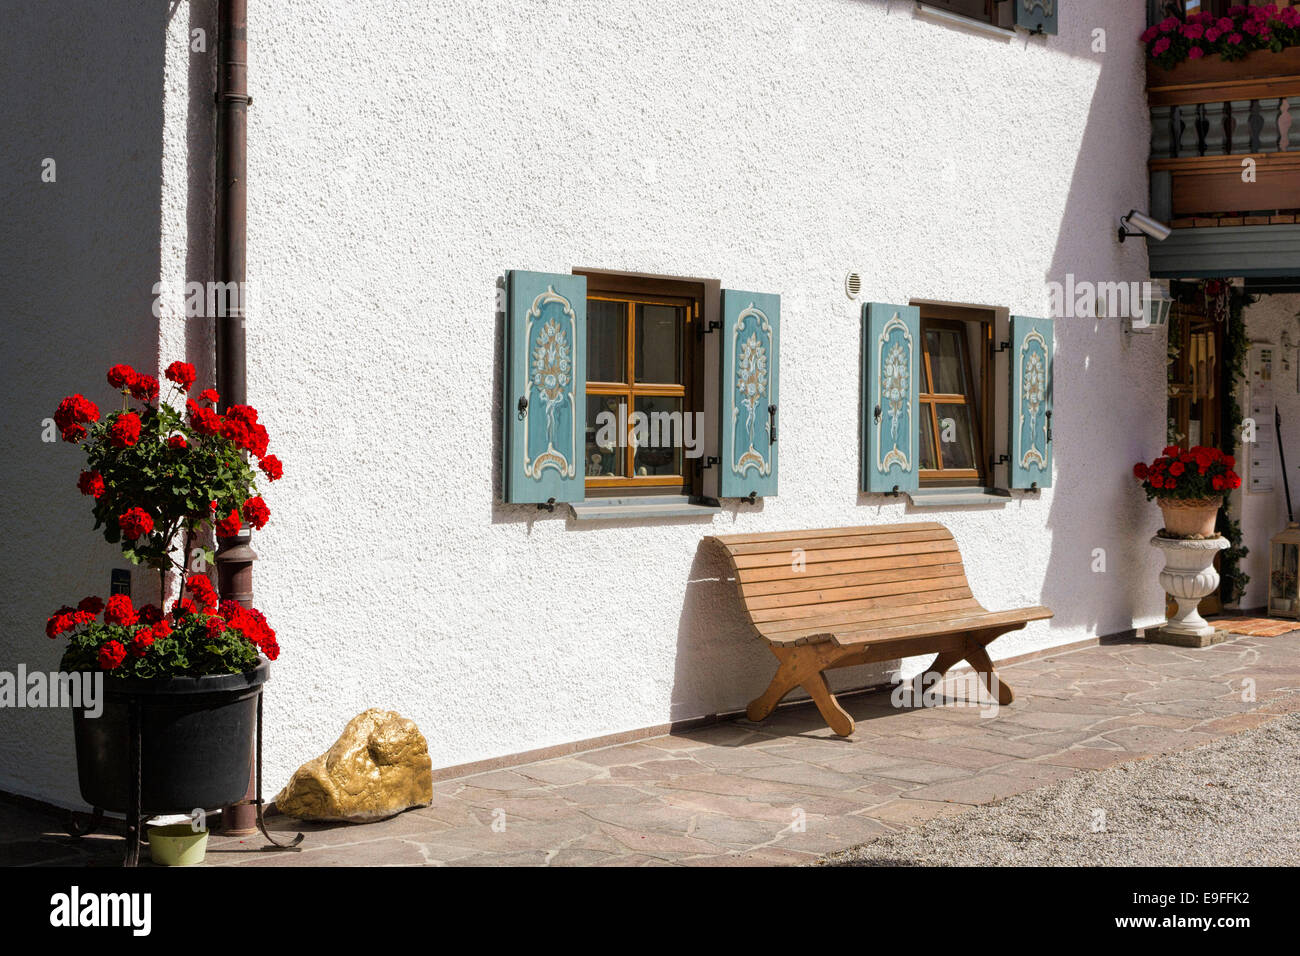 Bavarian architecture, windows, red Geranium flowers and bench seat, Bad Aibling, Upper Bavaria, Germany, Europe. Stock Photo